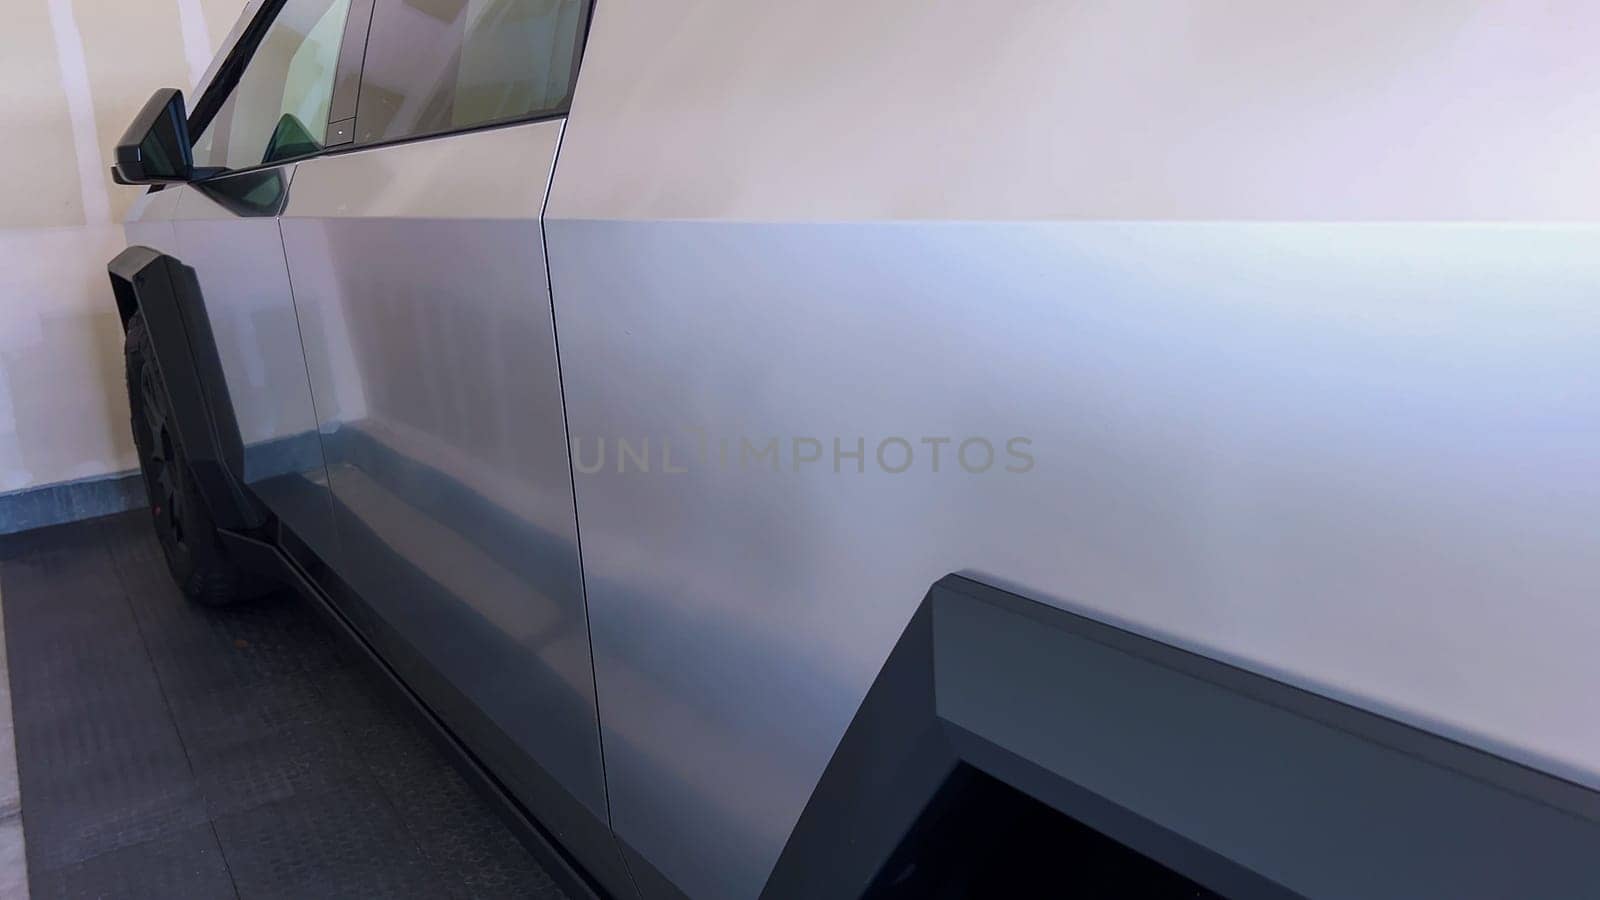 Detailed View of Tesla Cybertruck’s Angular Design and Textured Surface by arinahabich